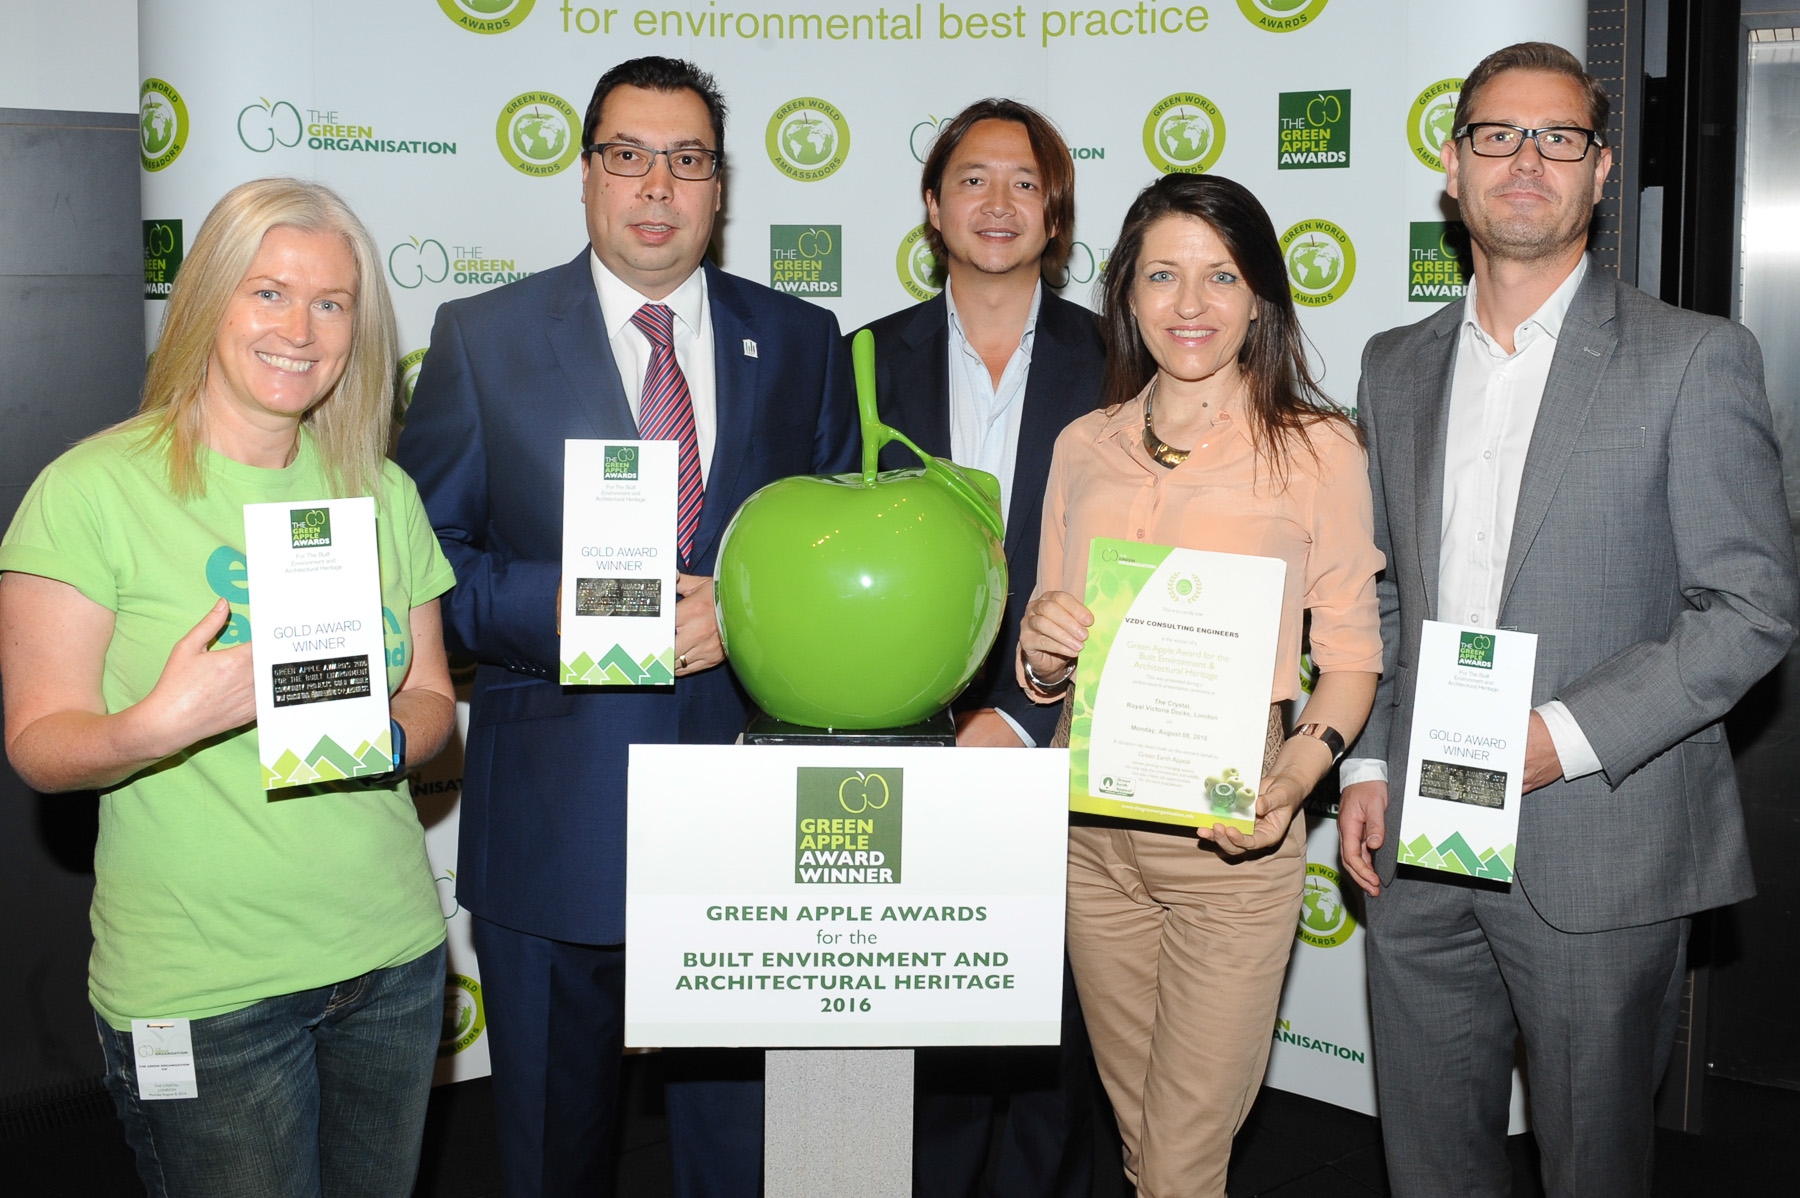 National green construction award for Batchwood Sports Centre